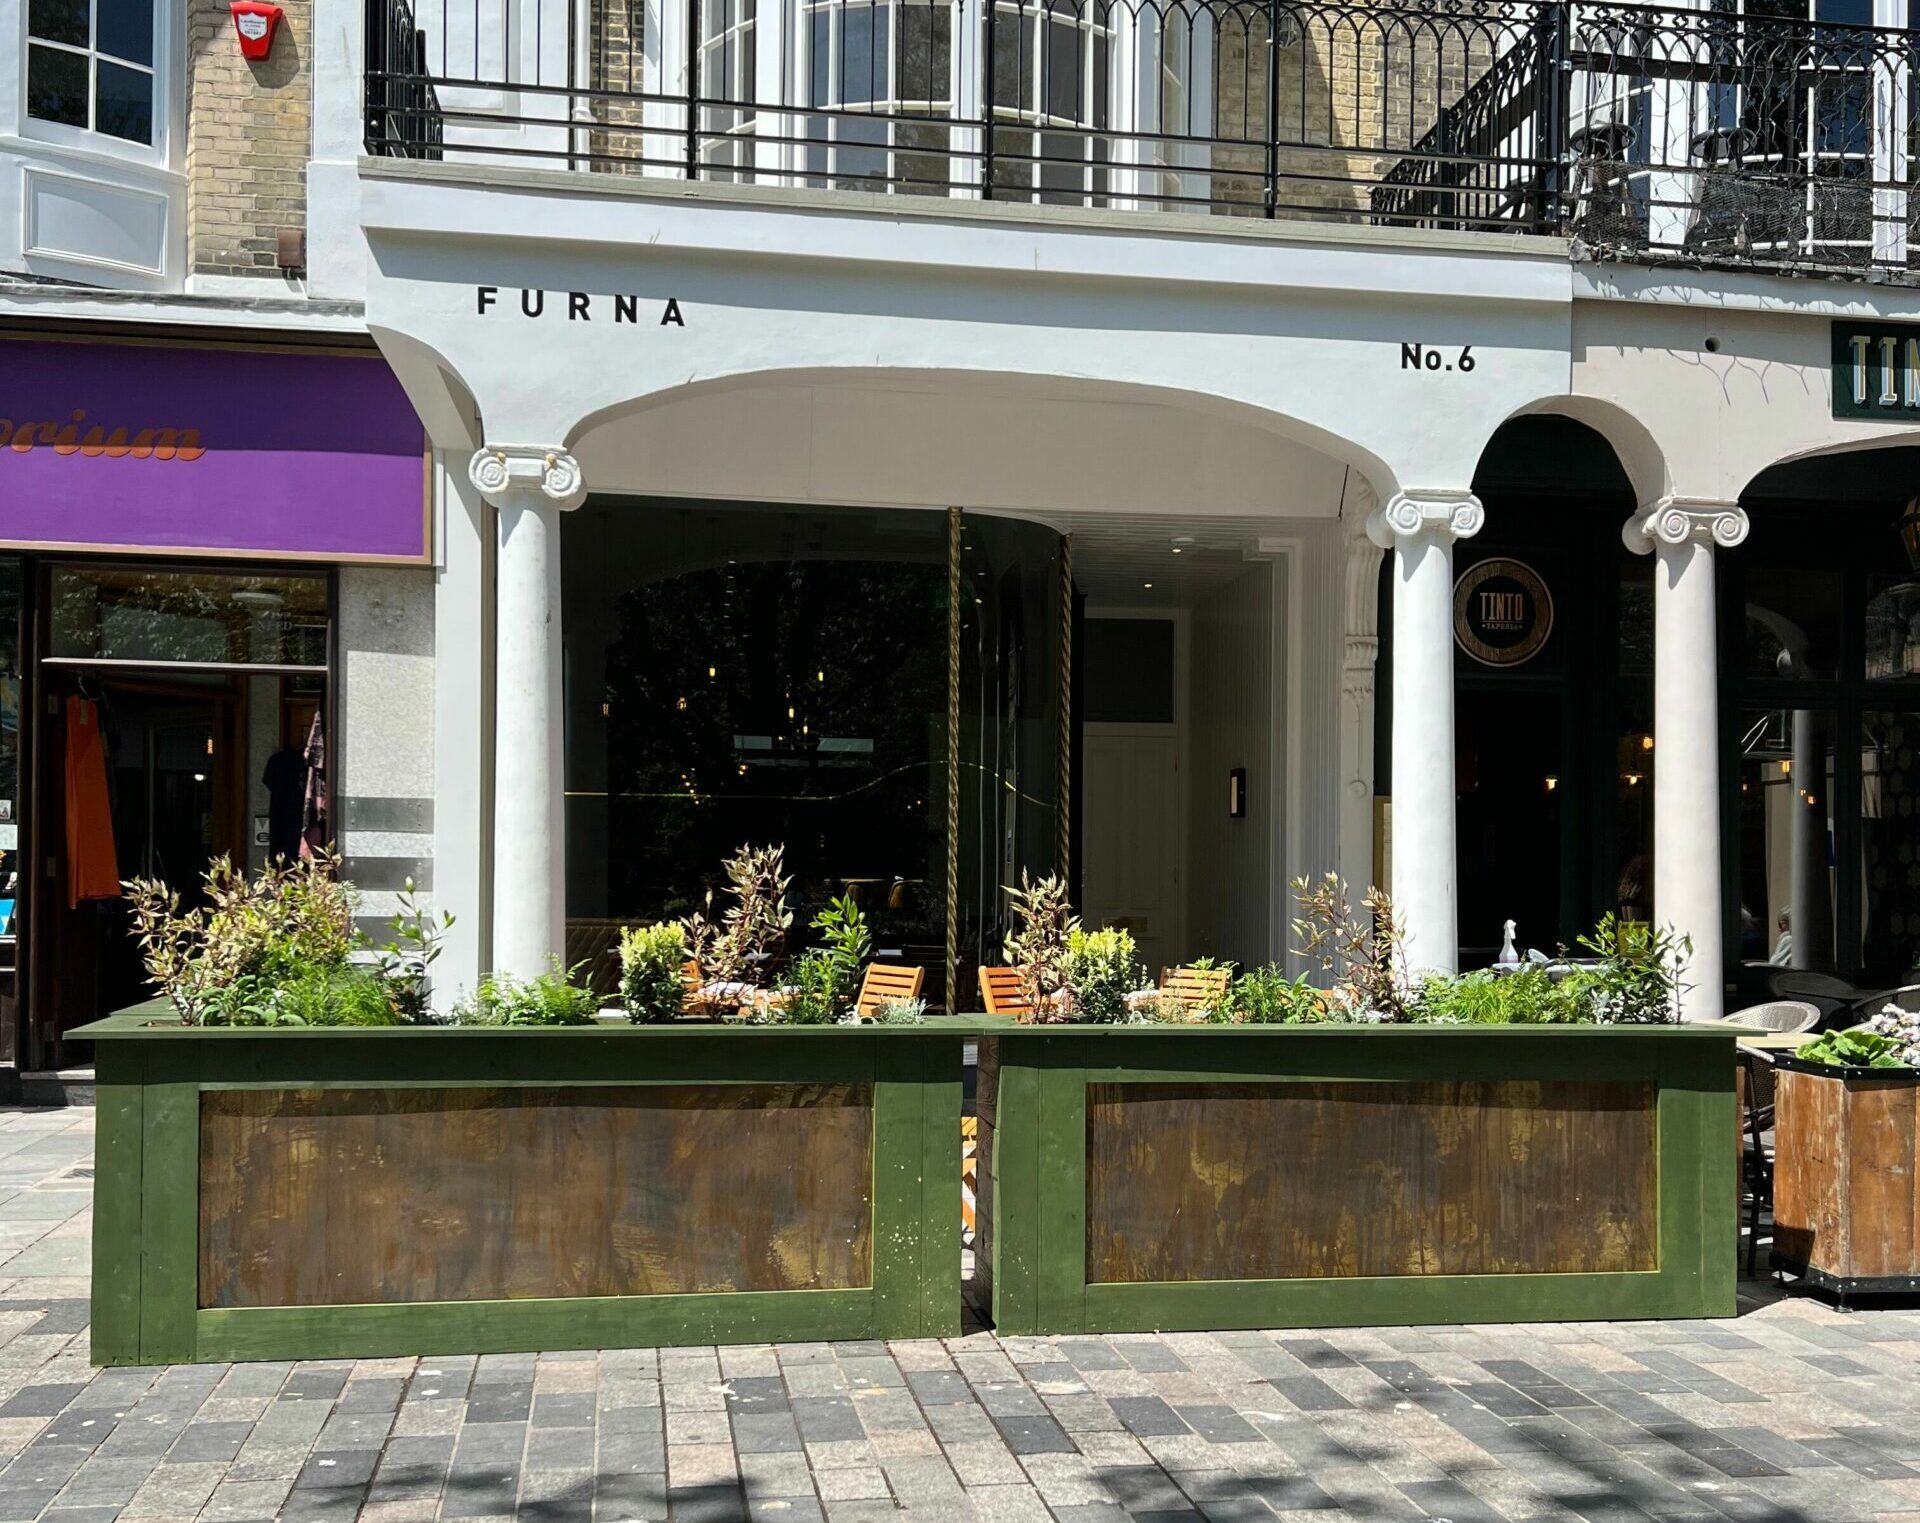 exterior shot of Furna on the pedestrianised street with outside seating.